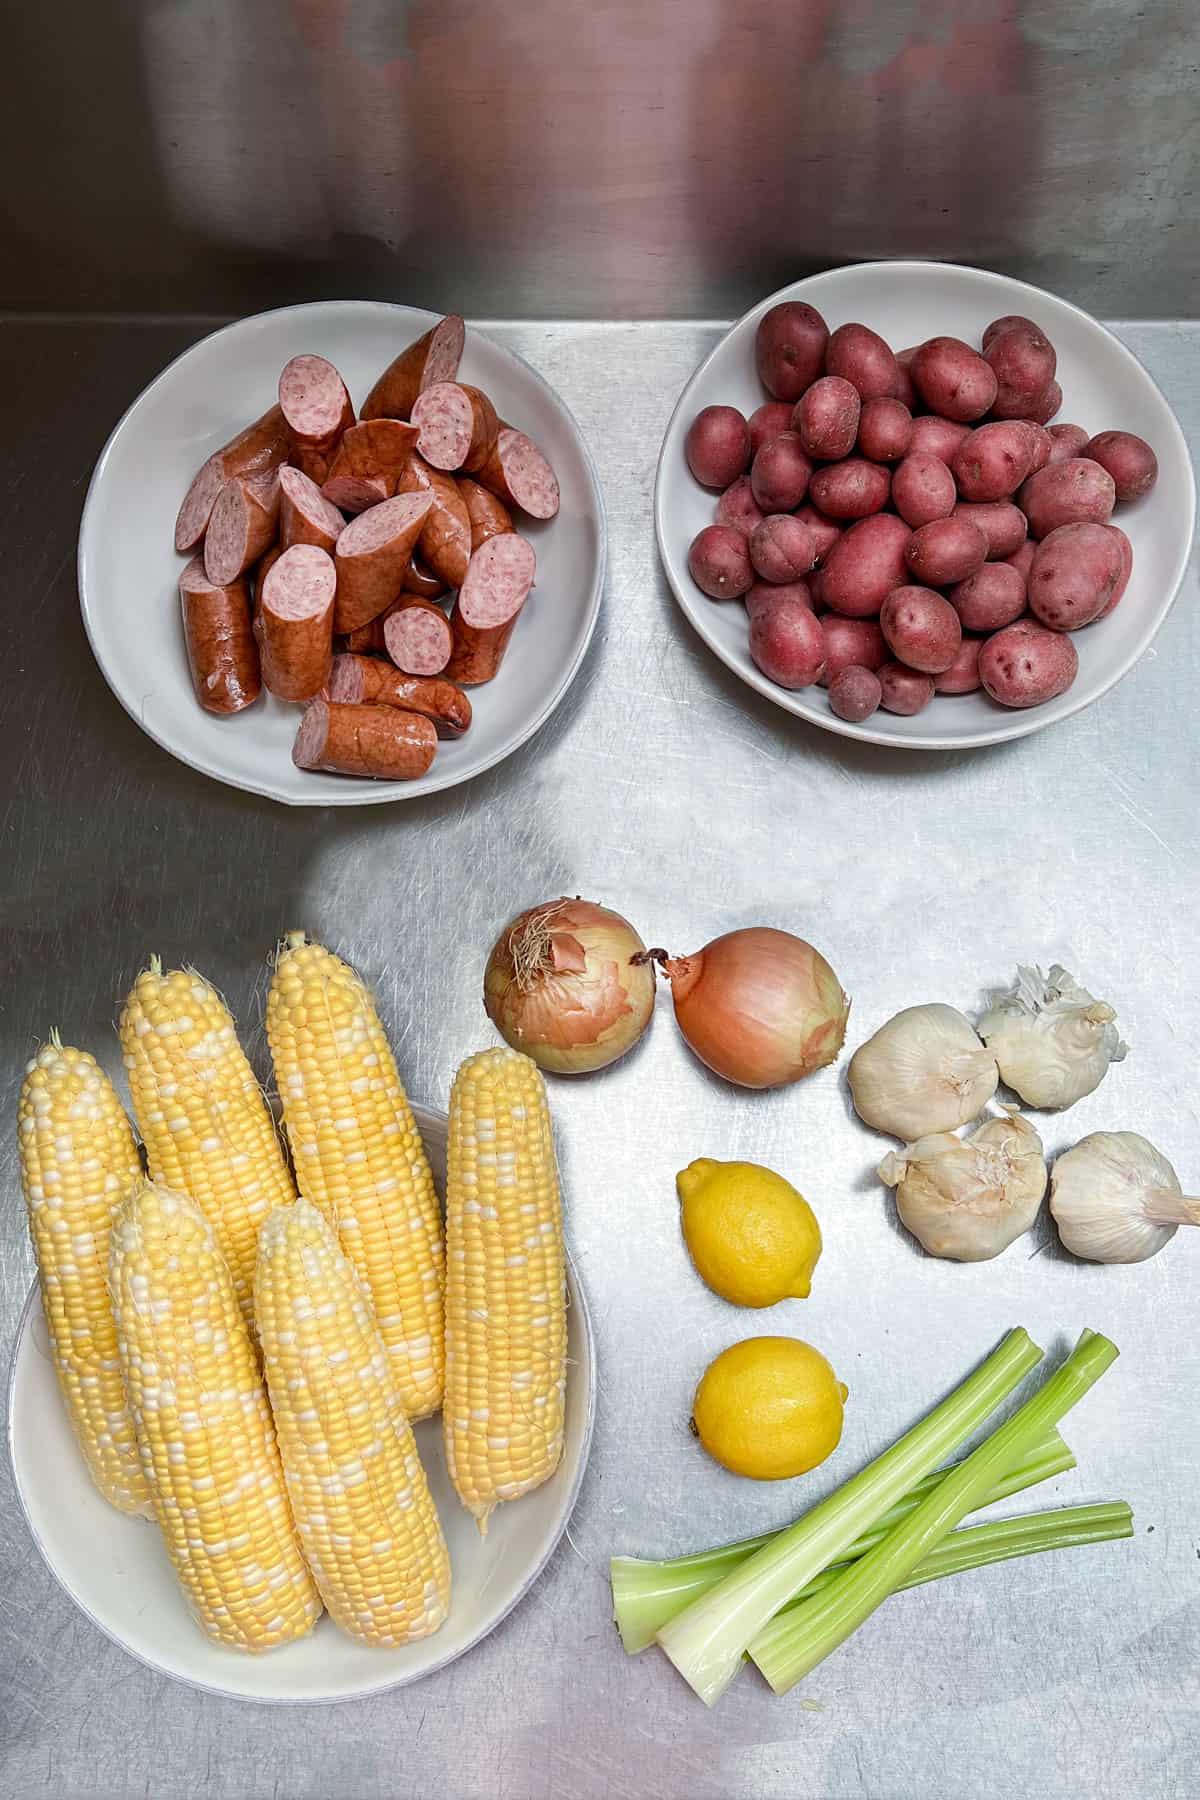 seafood boil ingredients on a stainless countertop: bowl of sliced sausages, bowl of small red potatoes, 6 ears of husked corn, two yellow onions, two lemons, 3 celery stalks and 4 garlic bulbs